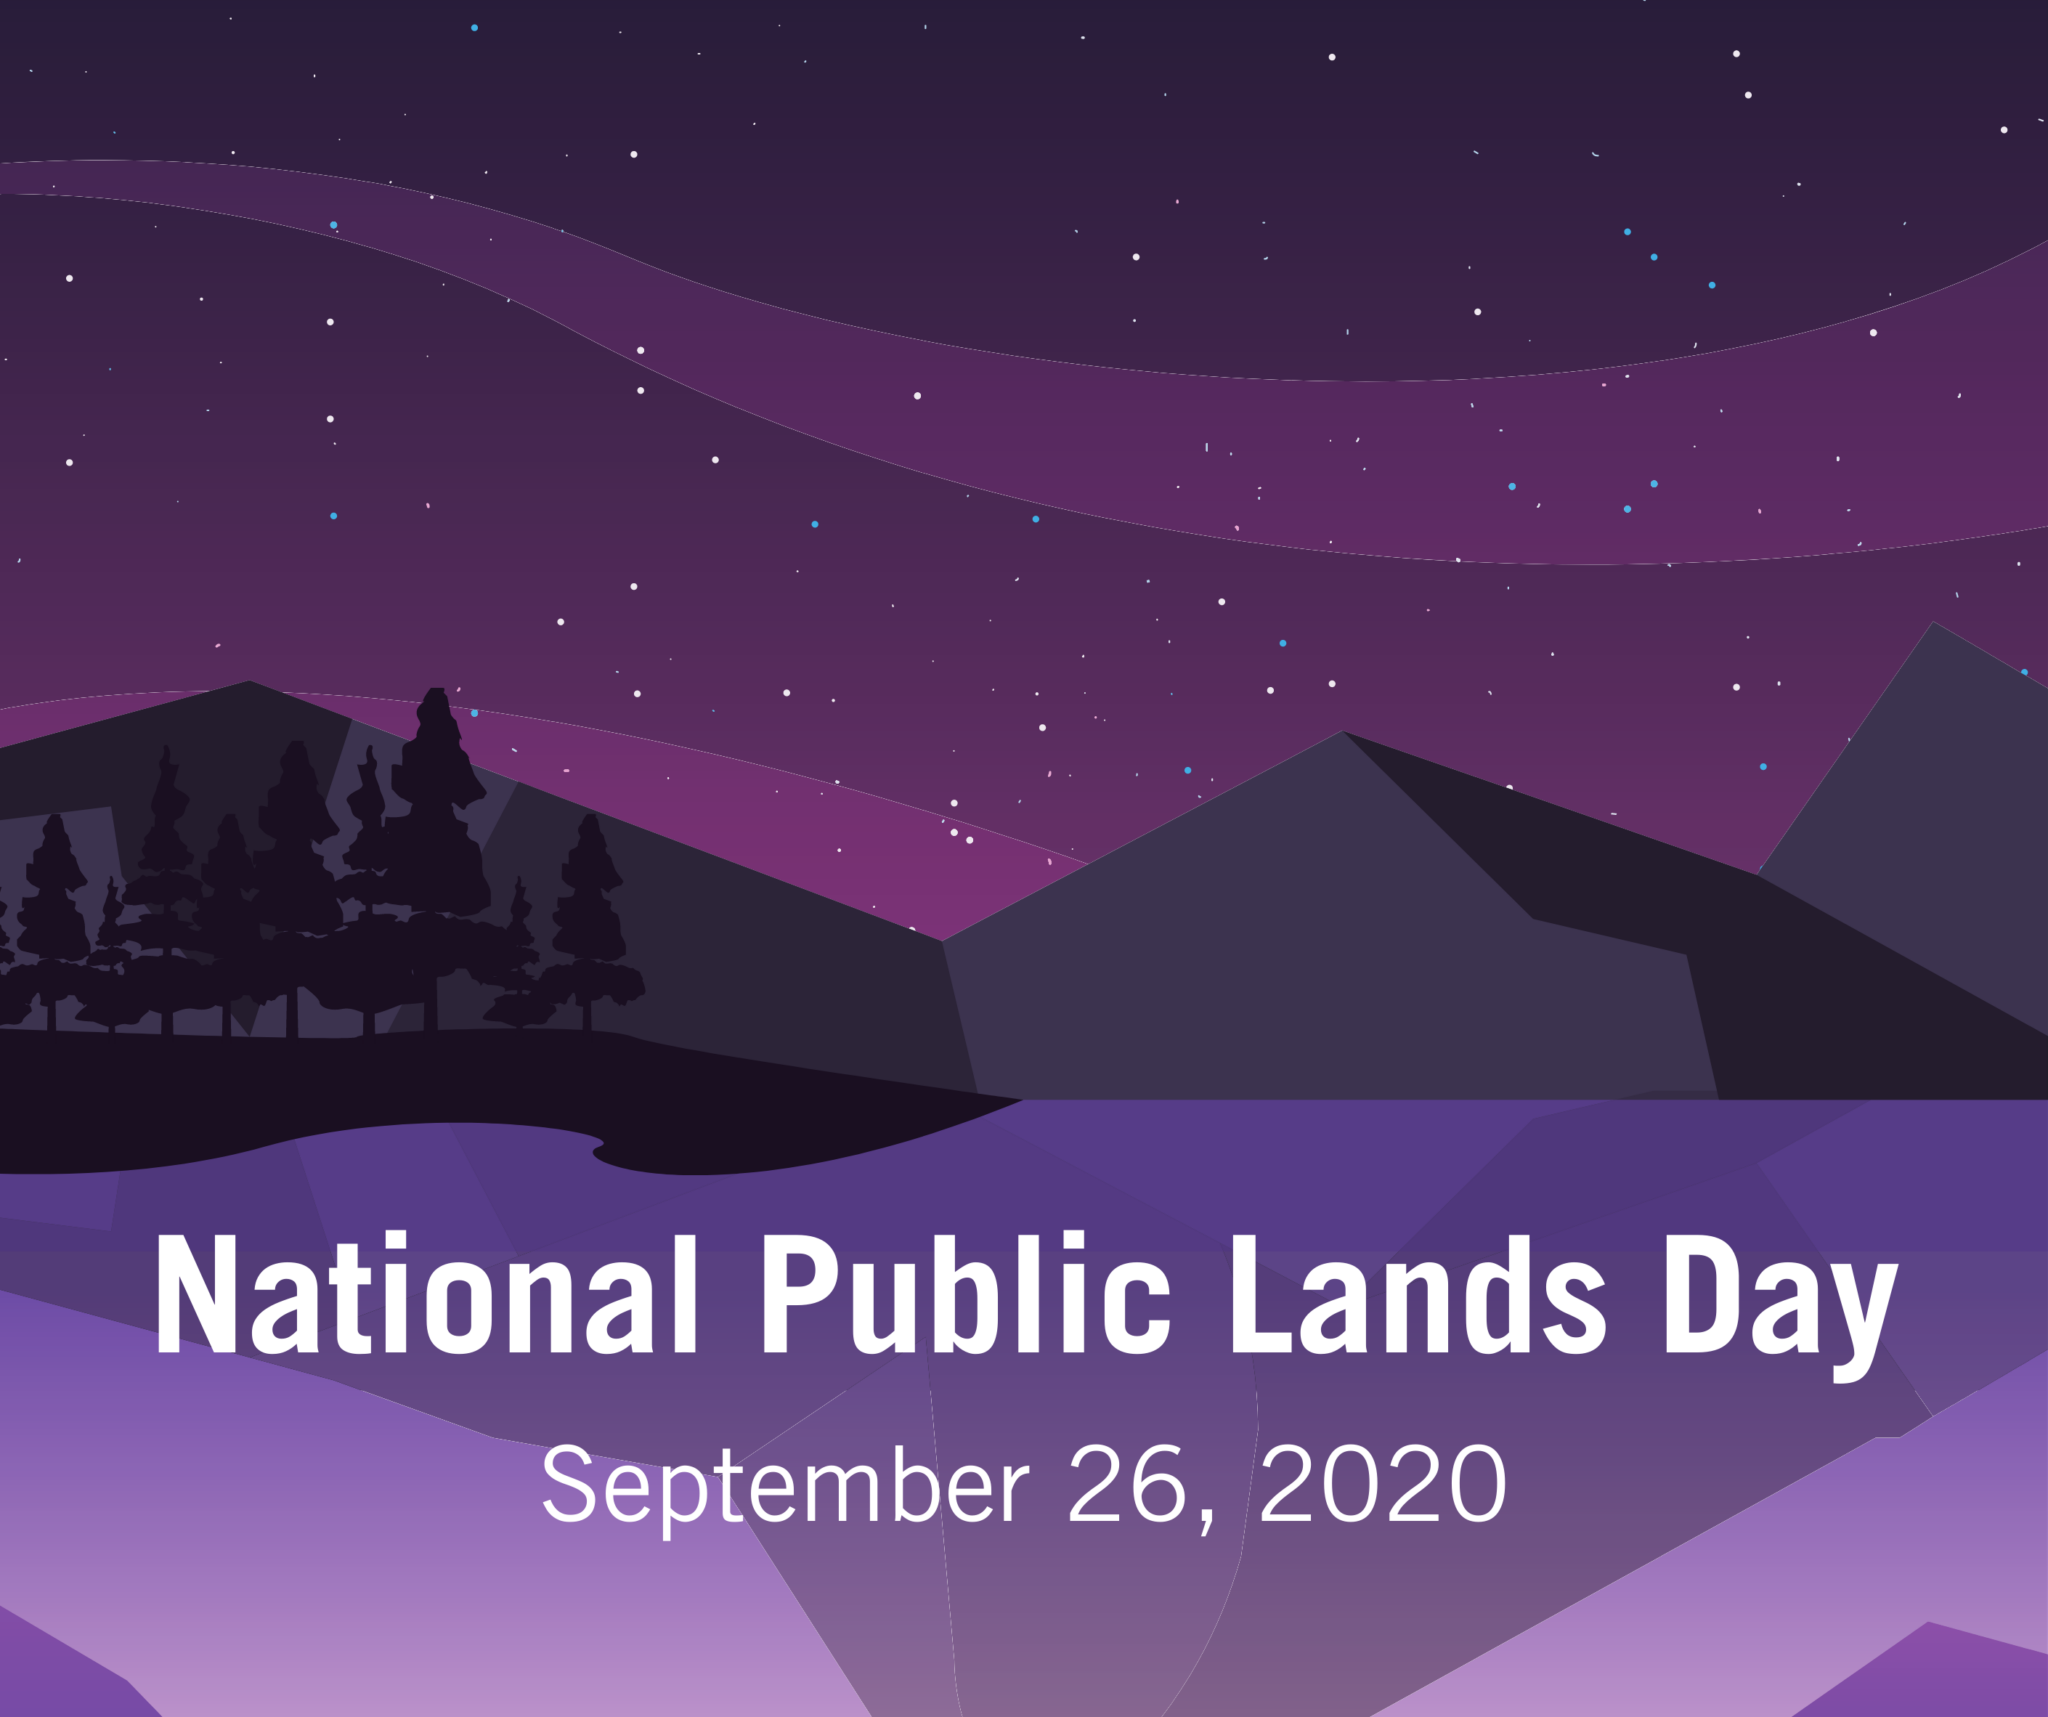 Ways to Connect with the Cosmos This National Public Lands Day